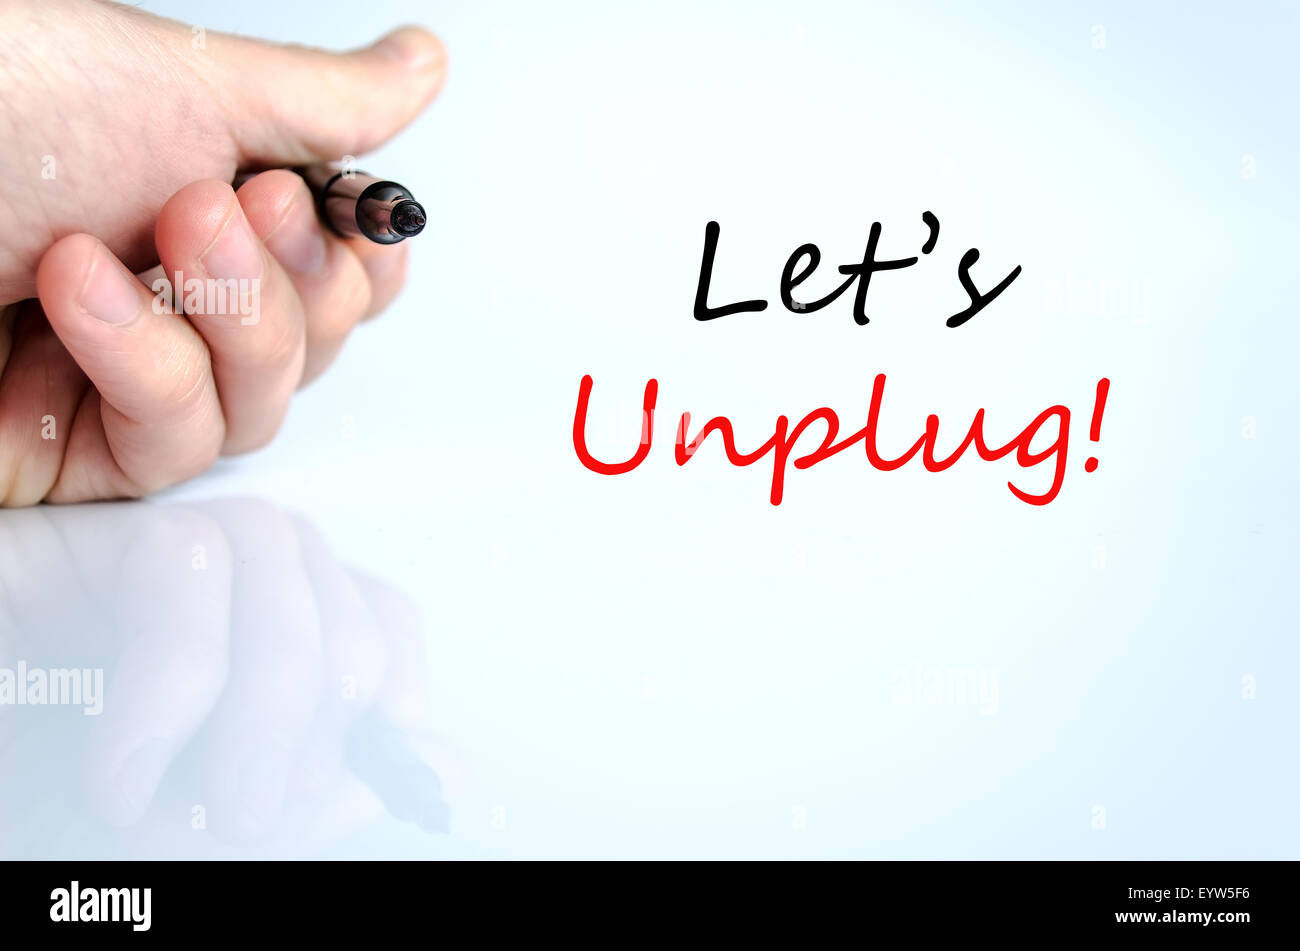 Let's unplug text concept isolated over white background Stock Photo